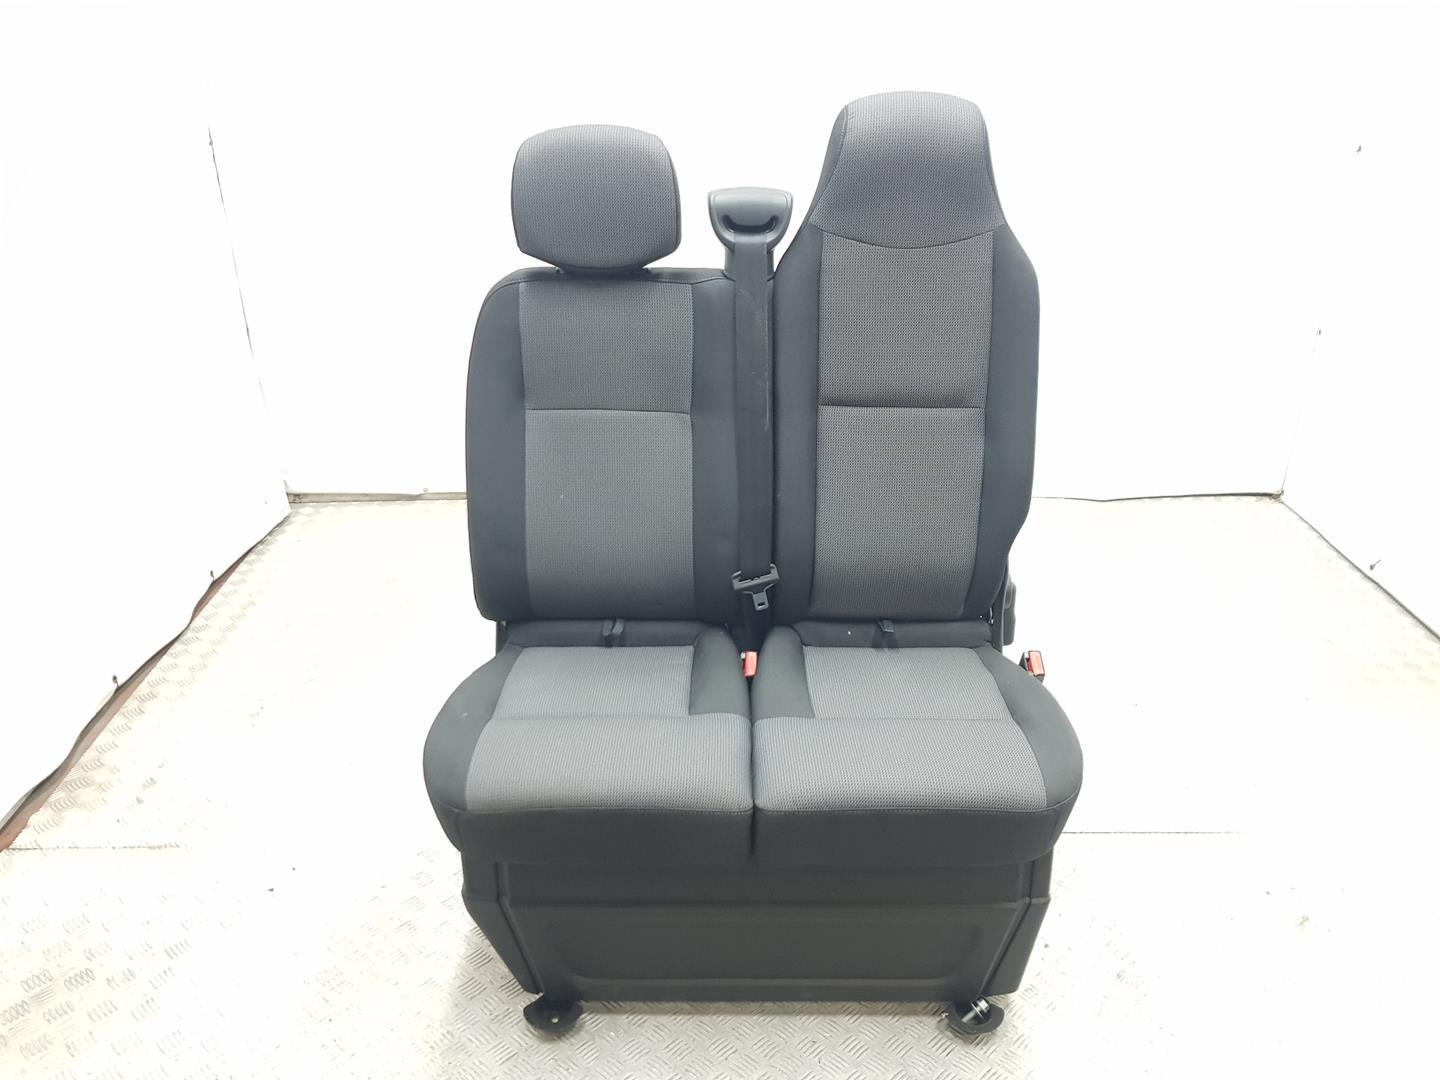 RENAULT Master 3 generation (2010-2023) Front Right Seat ASIENTOTELA, ASIENTOACOMPAÑANTE, DOSPLAZAS 24550107